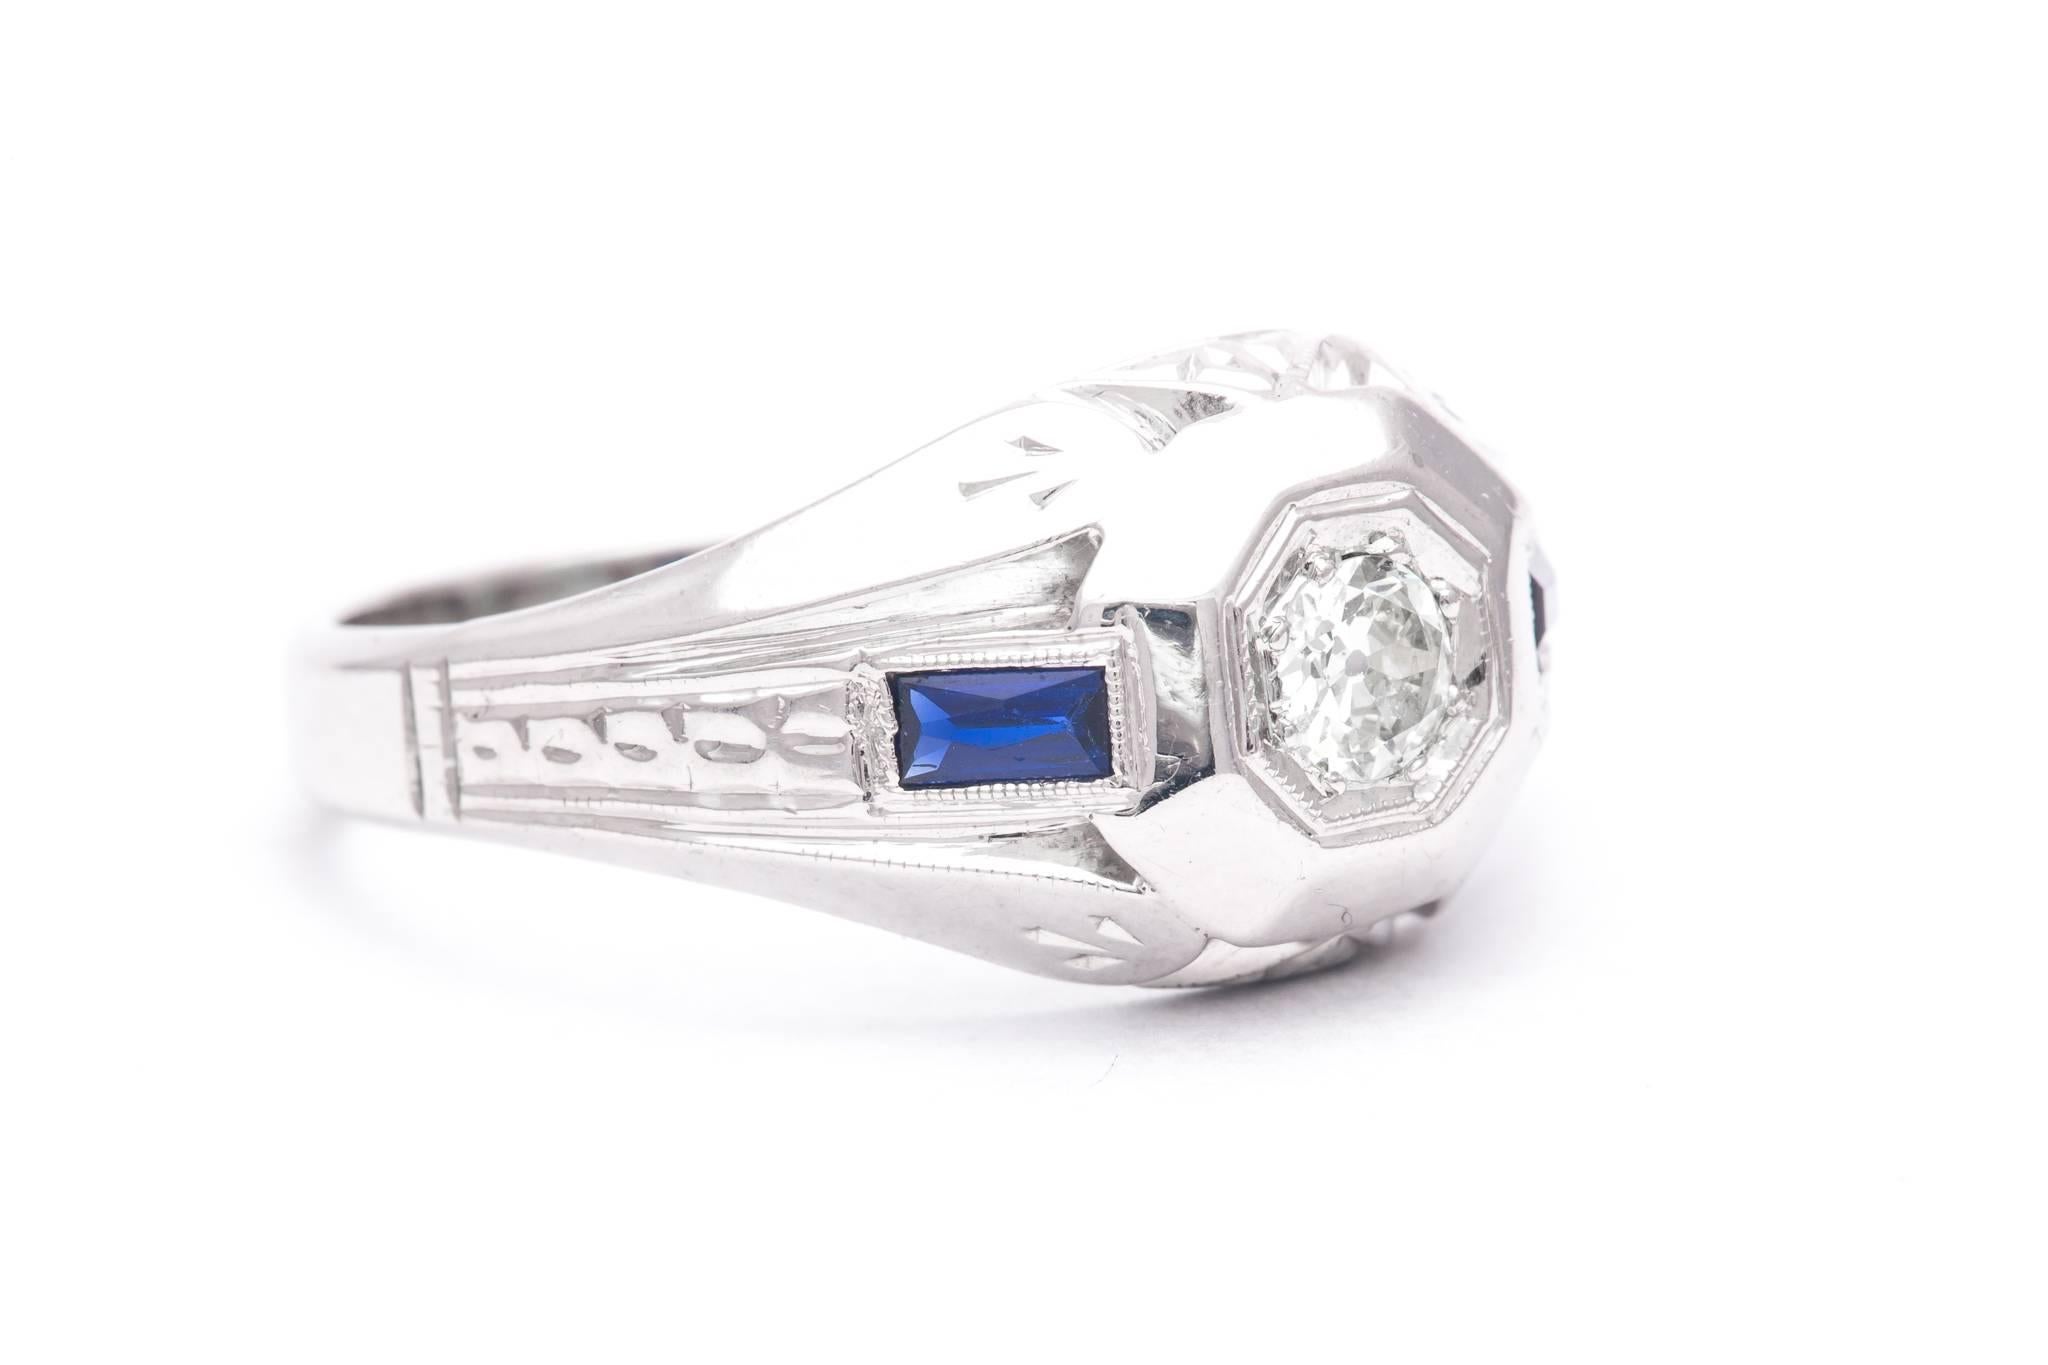 An original art deco period mens diamond, and sapphire ring in 18 karat white gold.  Centered by a sparkling antique mine cut diamond weighing 0.25 carats this ring features a pair of accenting French cut sapphires weighing a combined 0.40